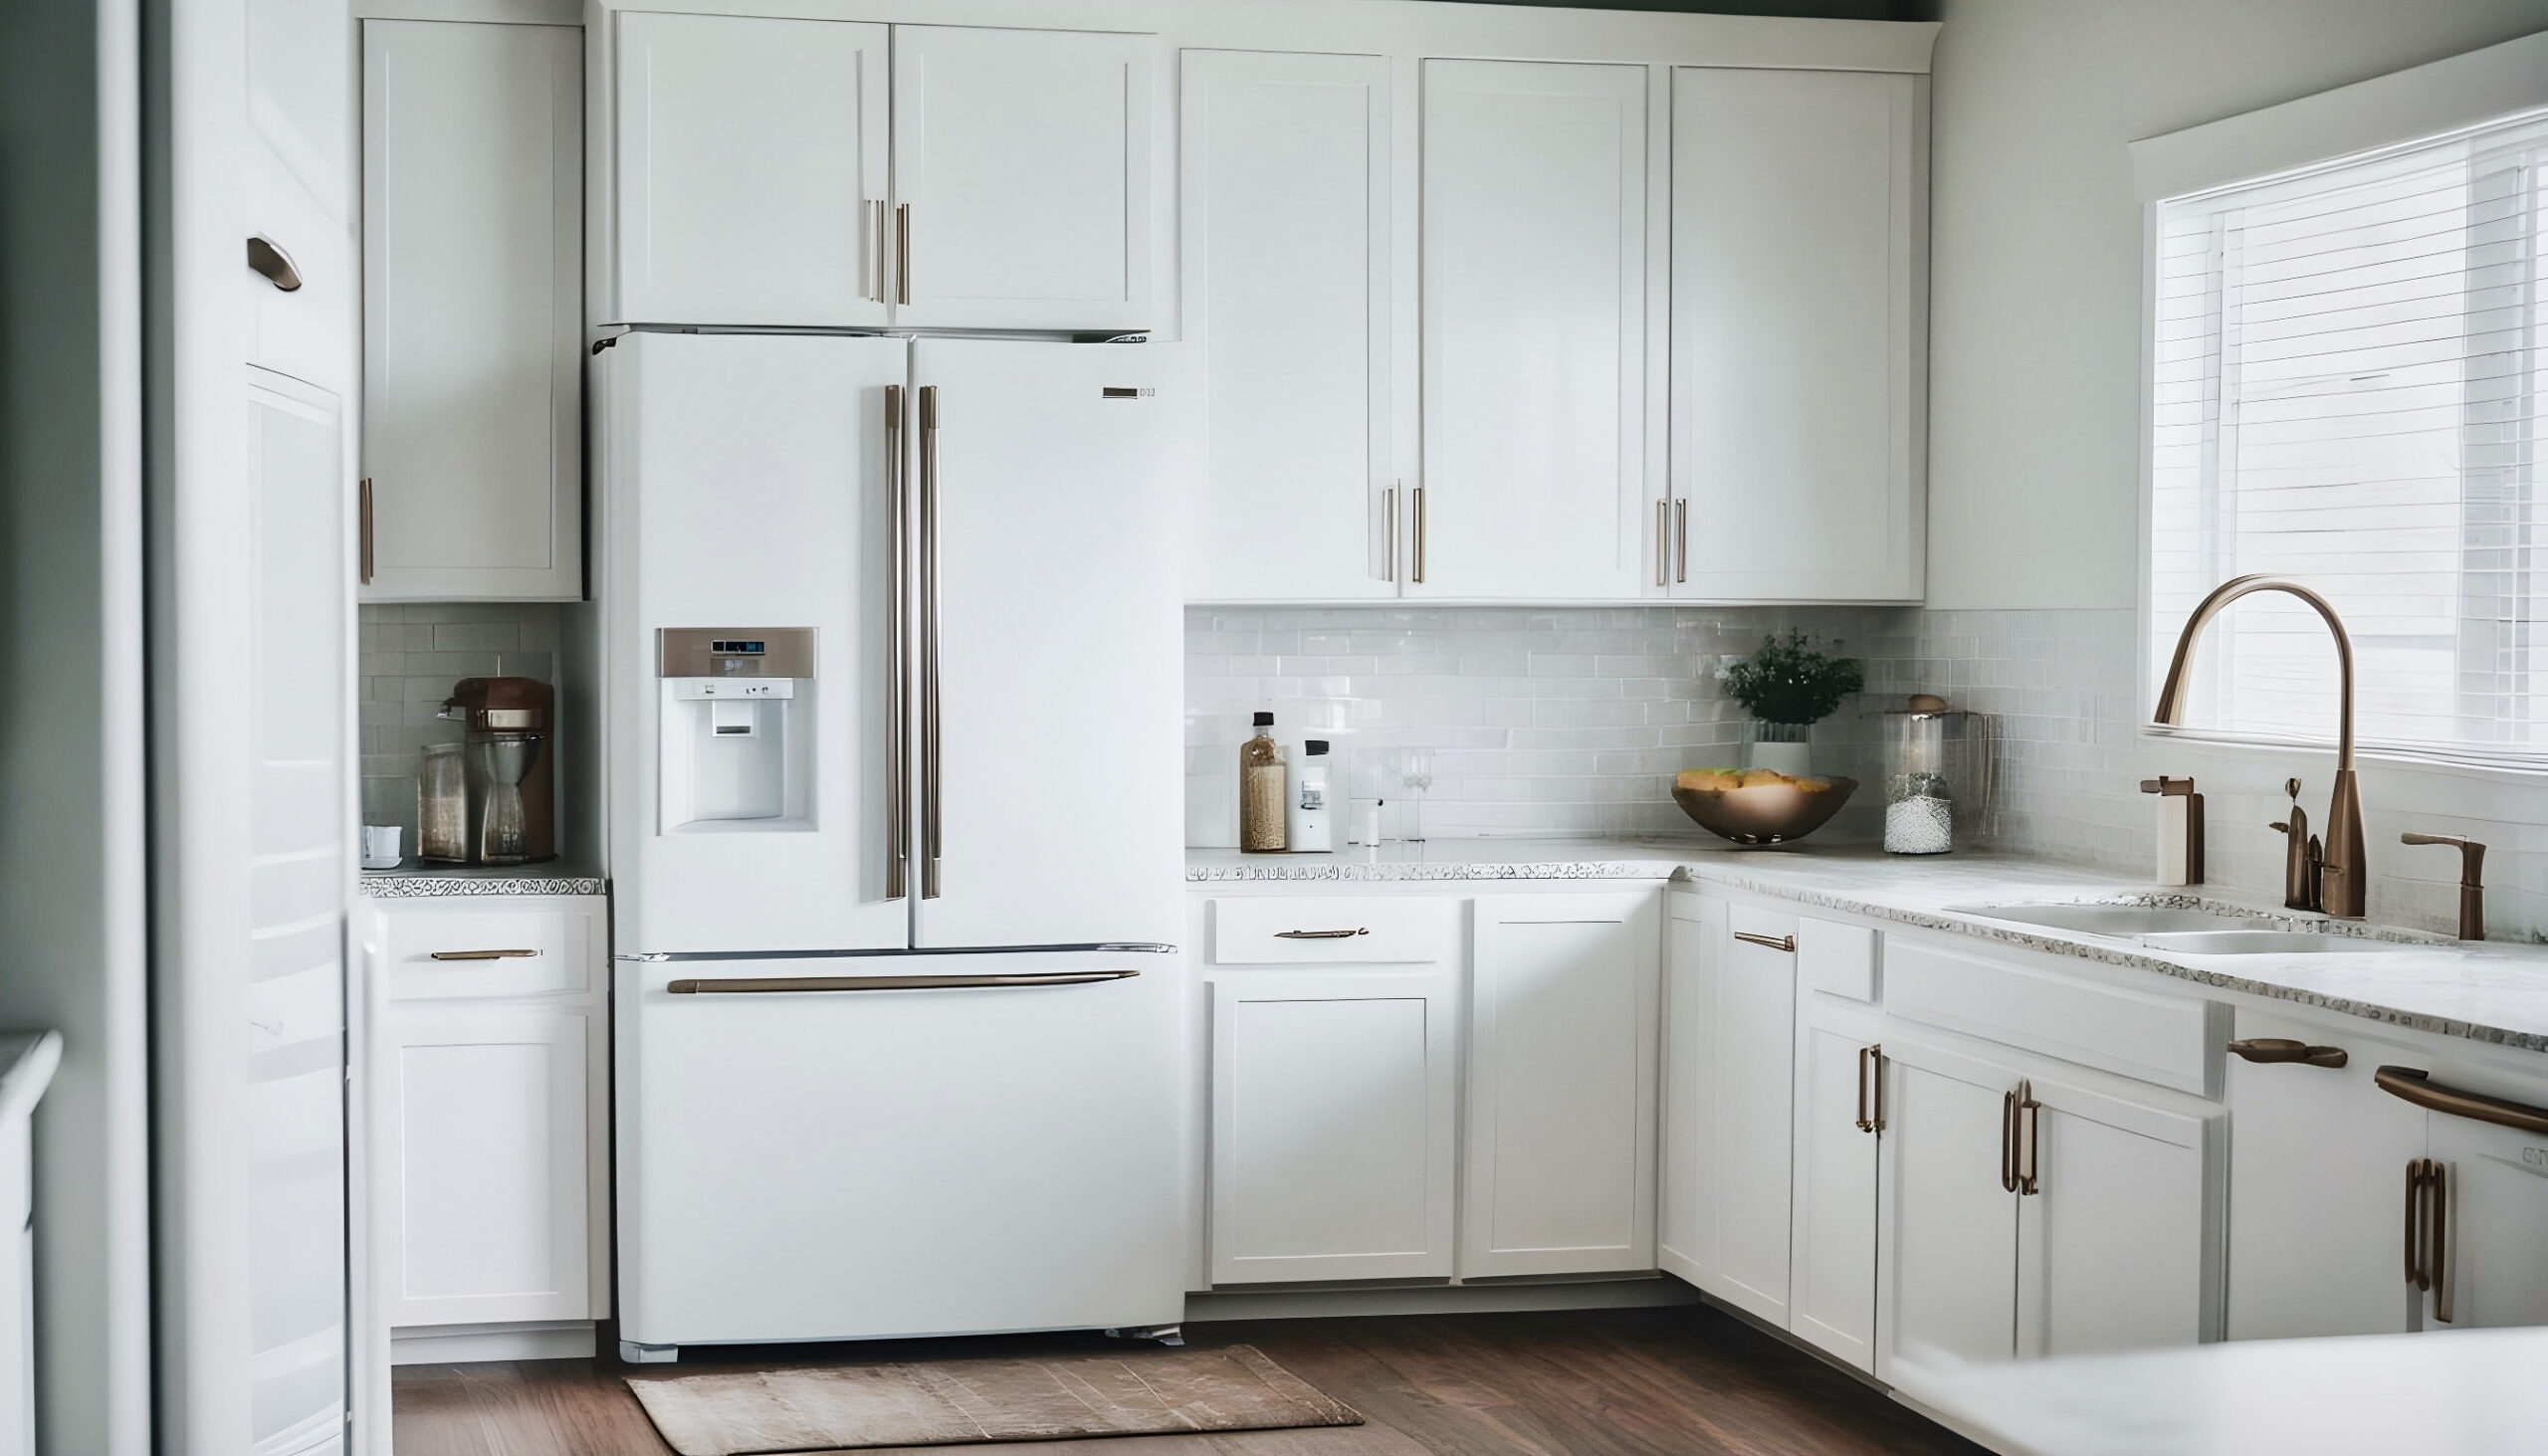 Refrigerator Maintenance and Repair Services in Pflugerville